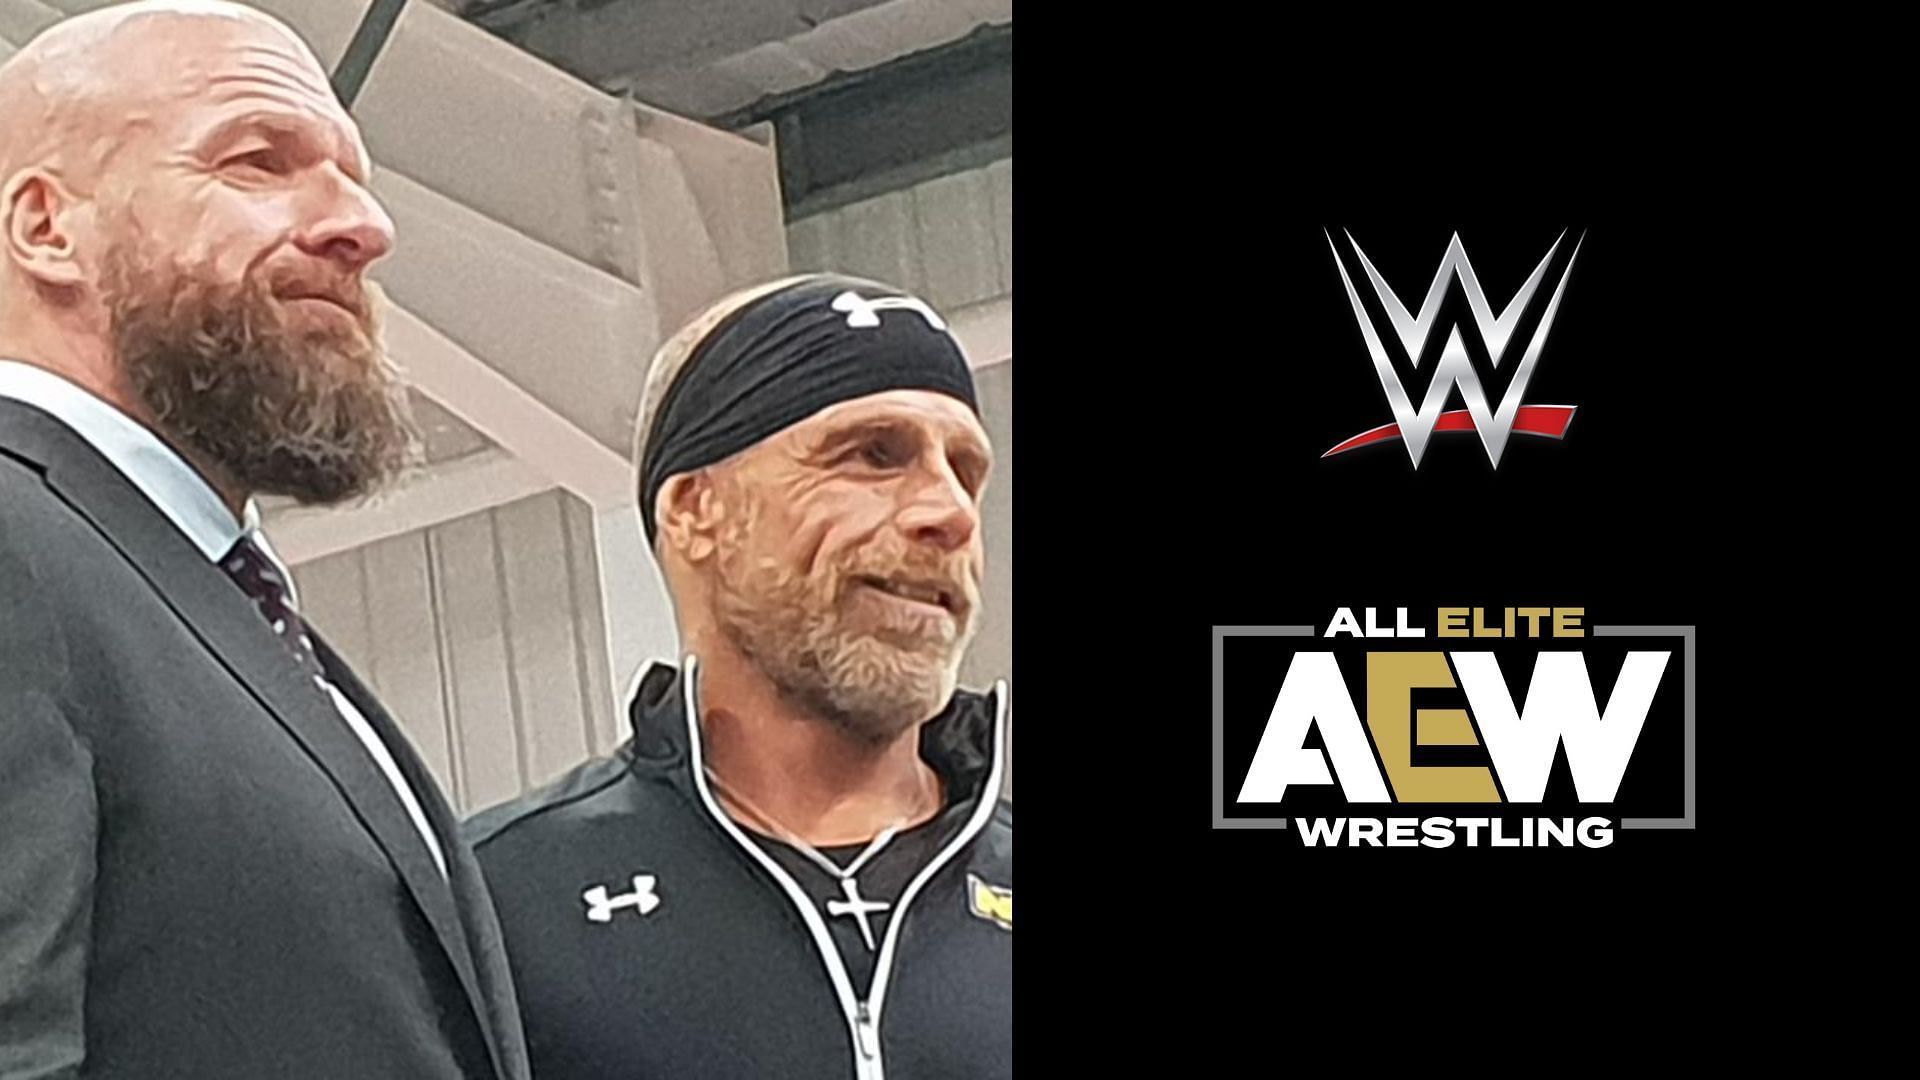 WWE Chief Content Officer Triple H, and SVP of Talent Development Creative, Shawn Michaels.